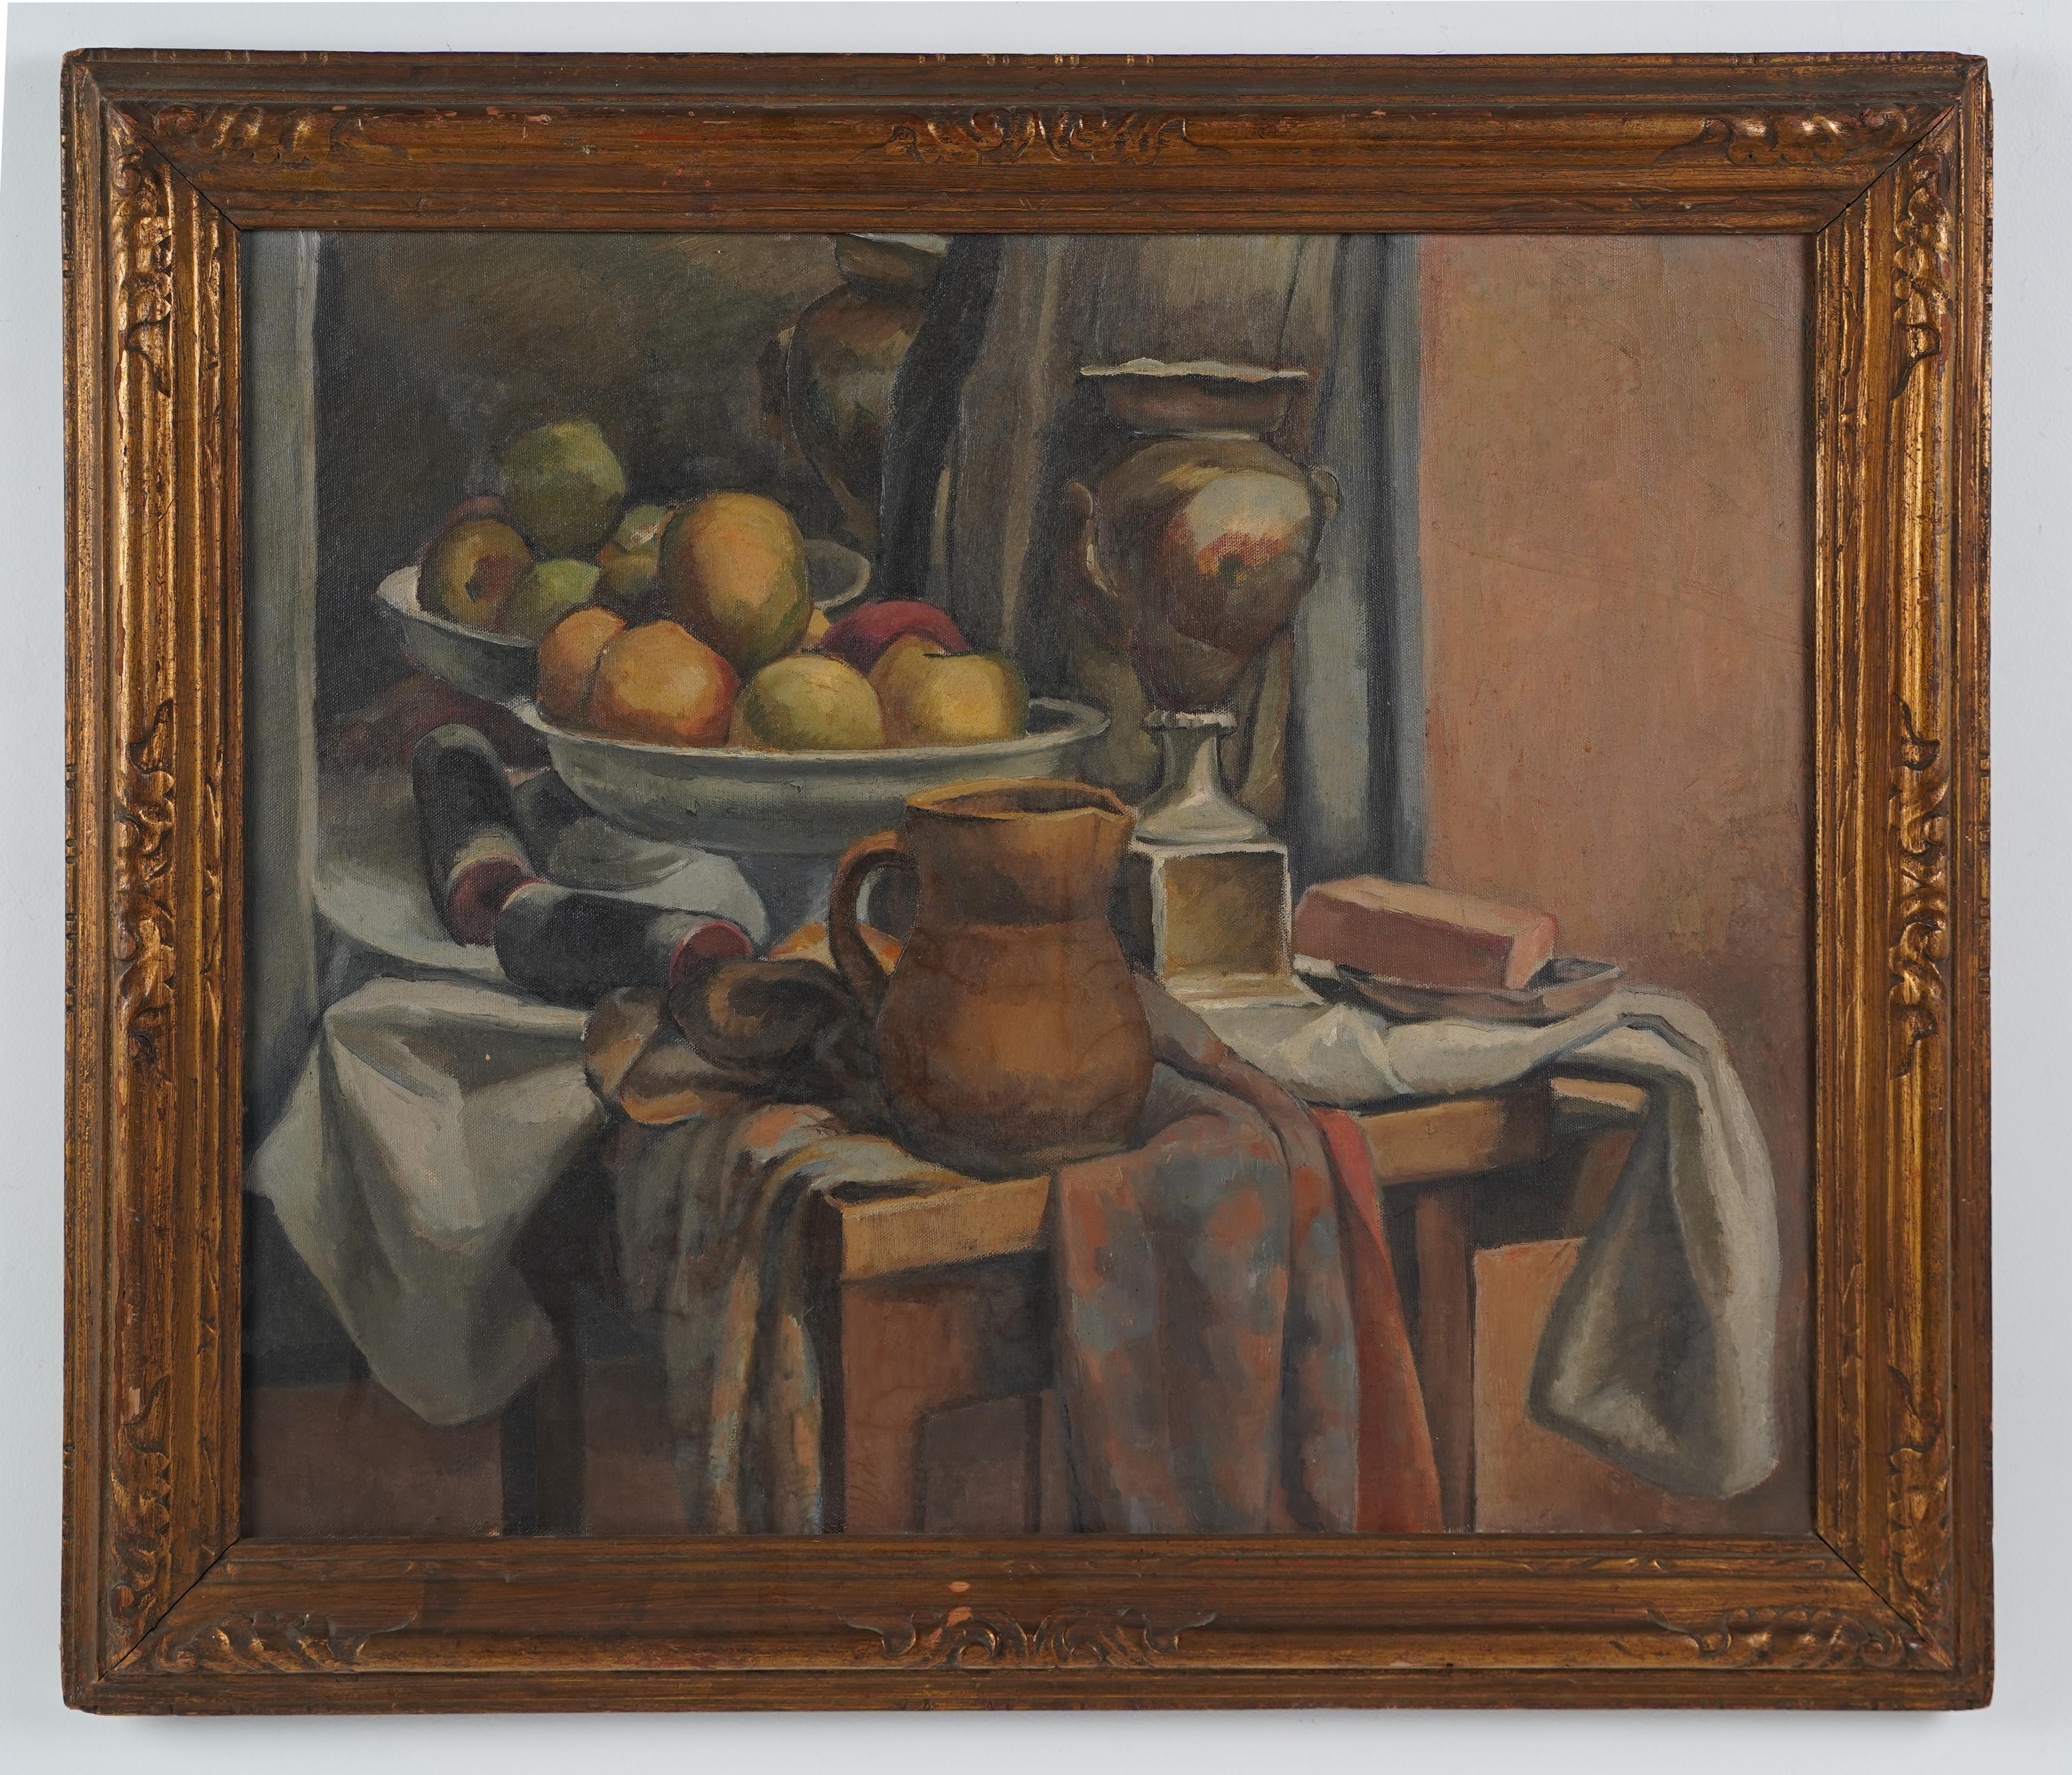 Antique American modernist still life oil painting by Mary M. Greer (- 1900).  Oil on canvas.  Signed.  Framed.  Image size, 25.5L x 21.5H.